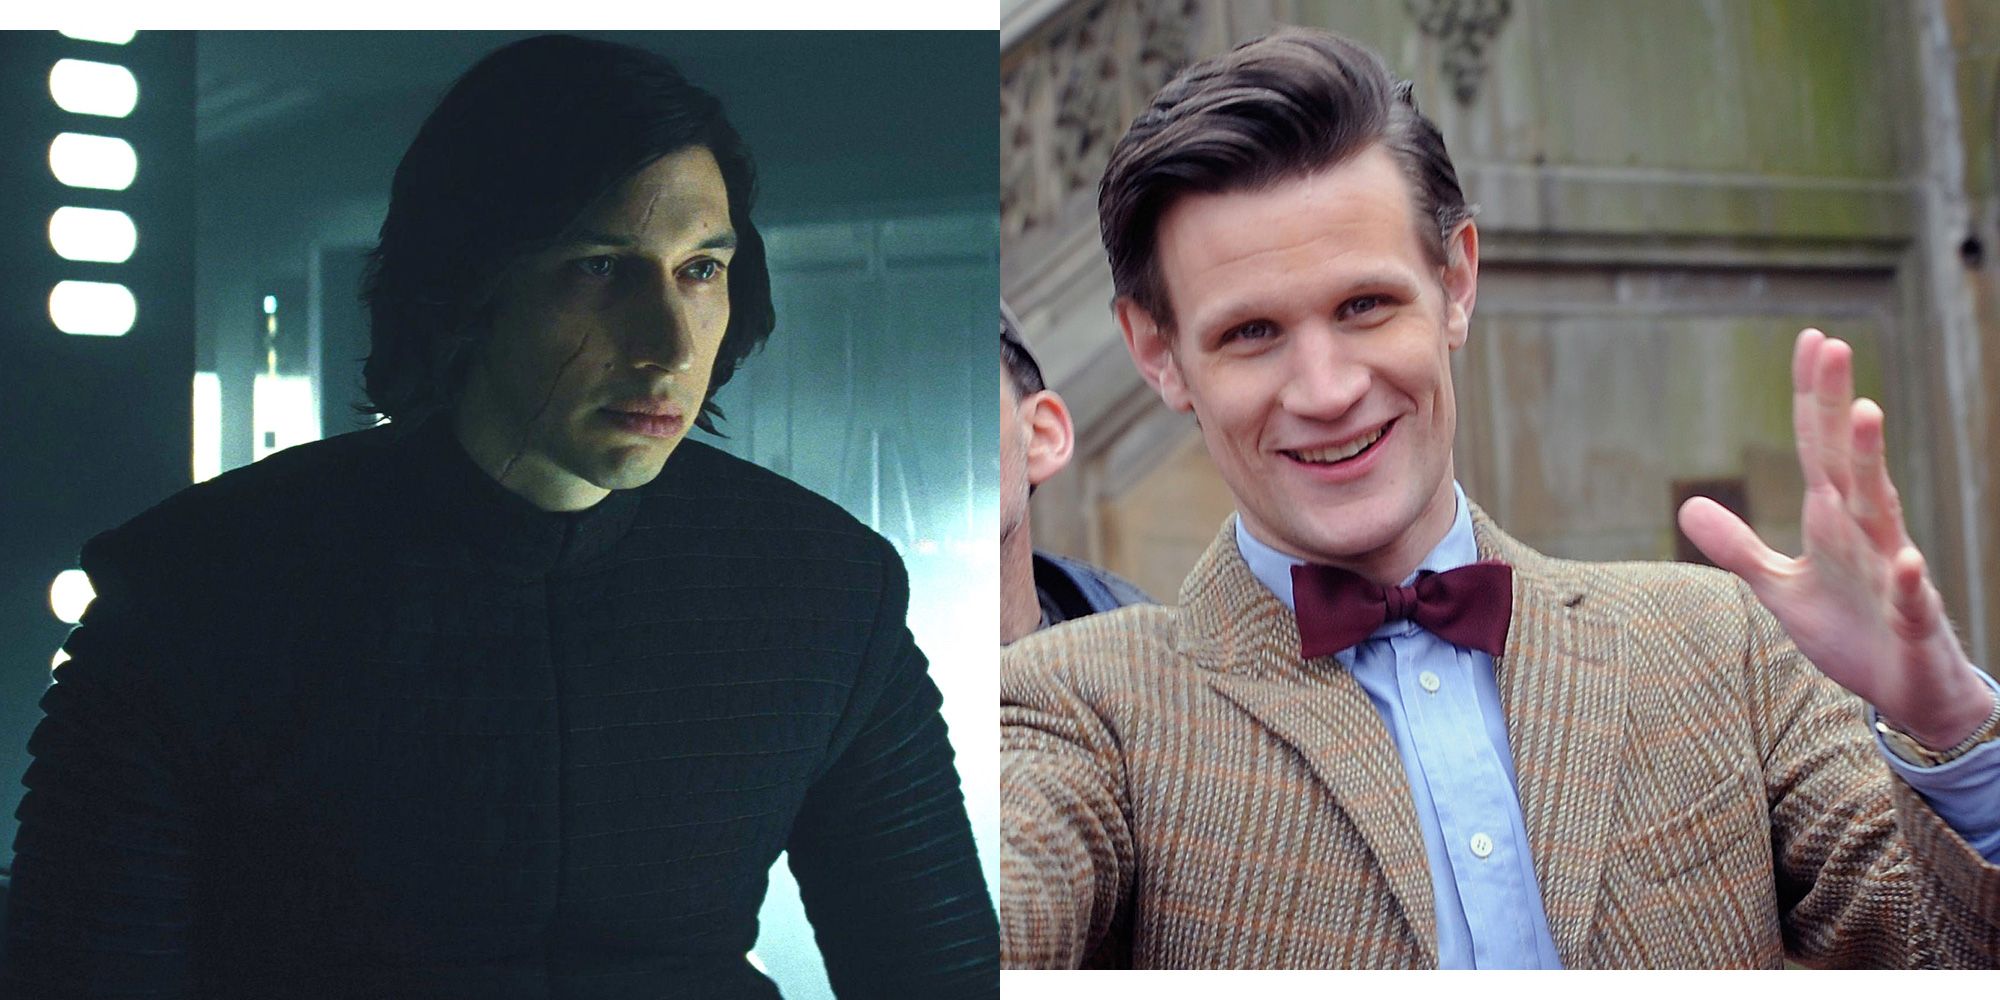 Star Wars: Matt Smith Confirms His Game-Changing Episode 9 Character